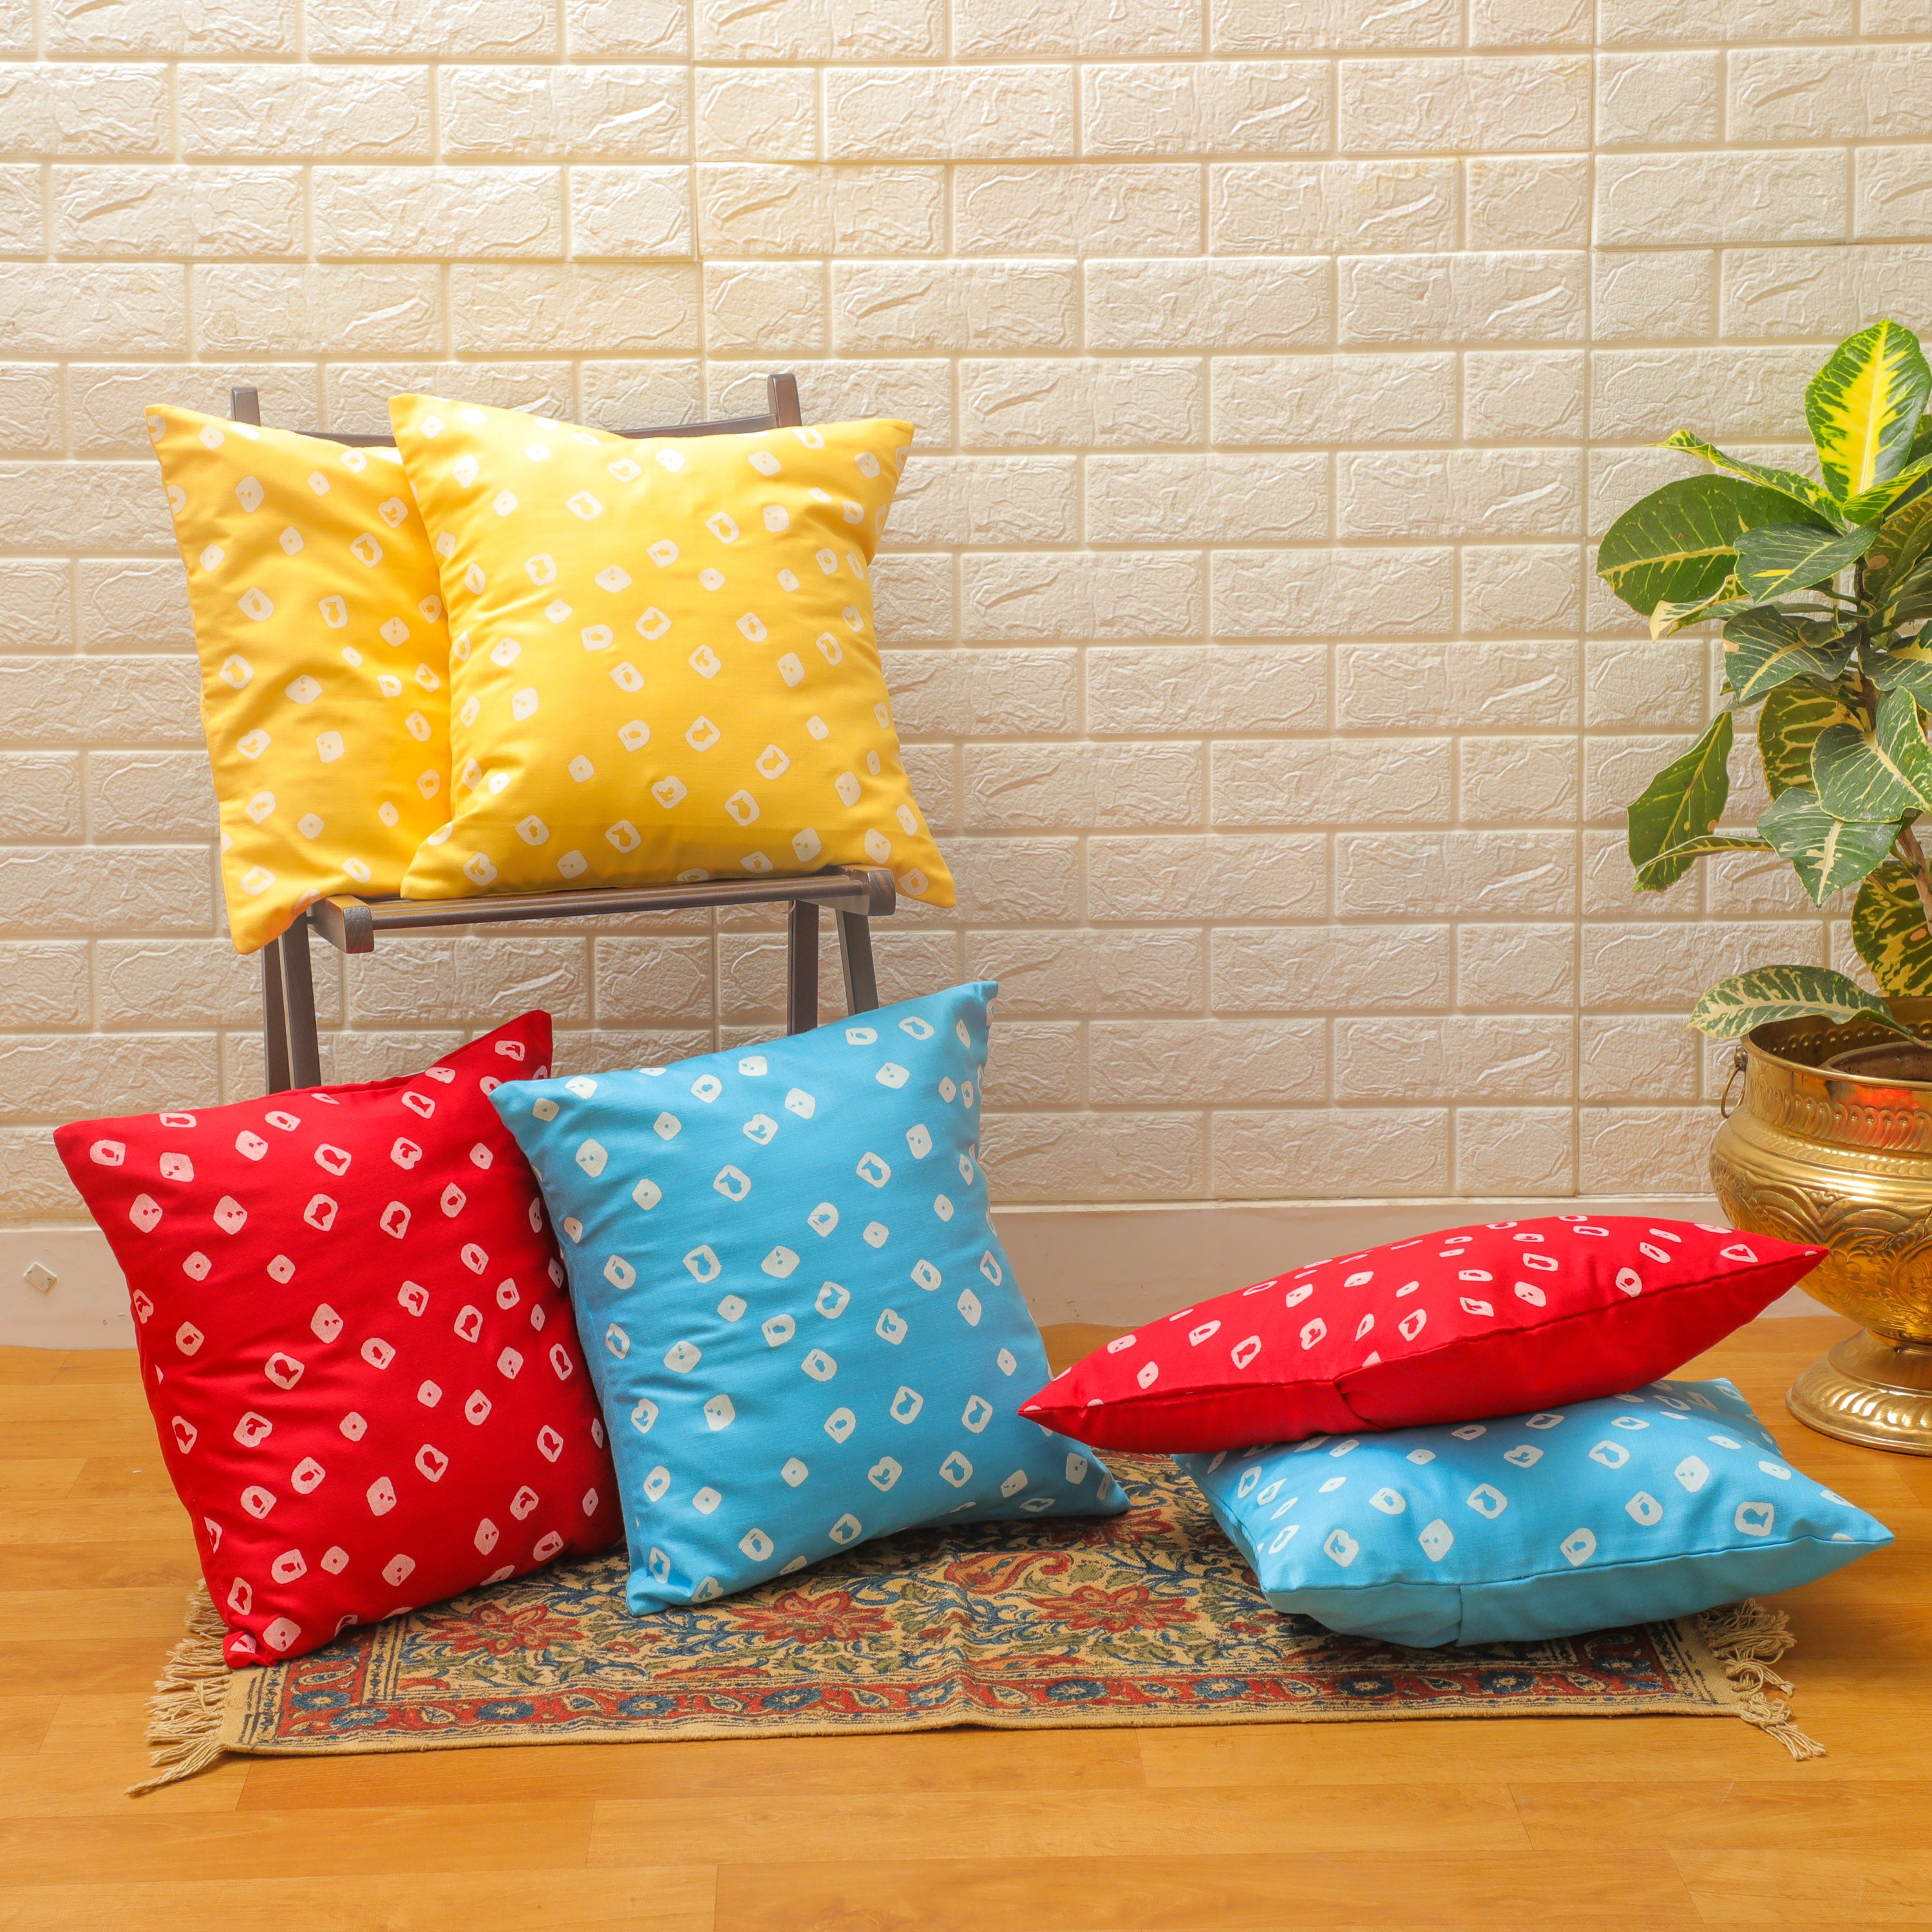 Add a pop of color and texture to your living space with this beautiful Bandhini cotton printed cushion